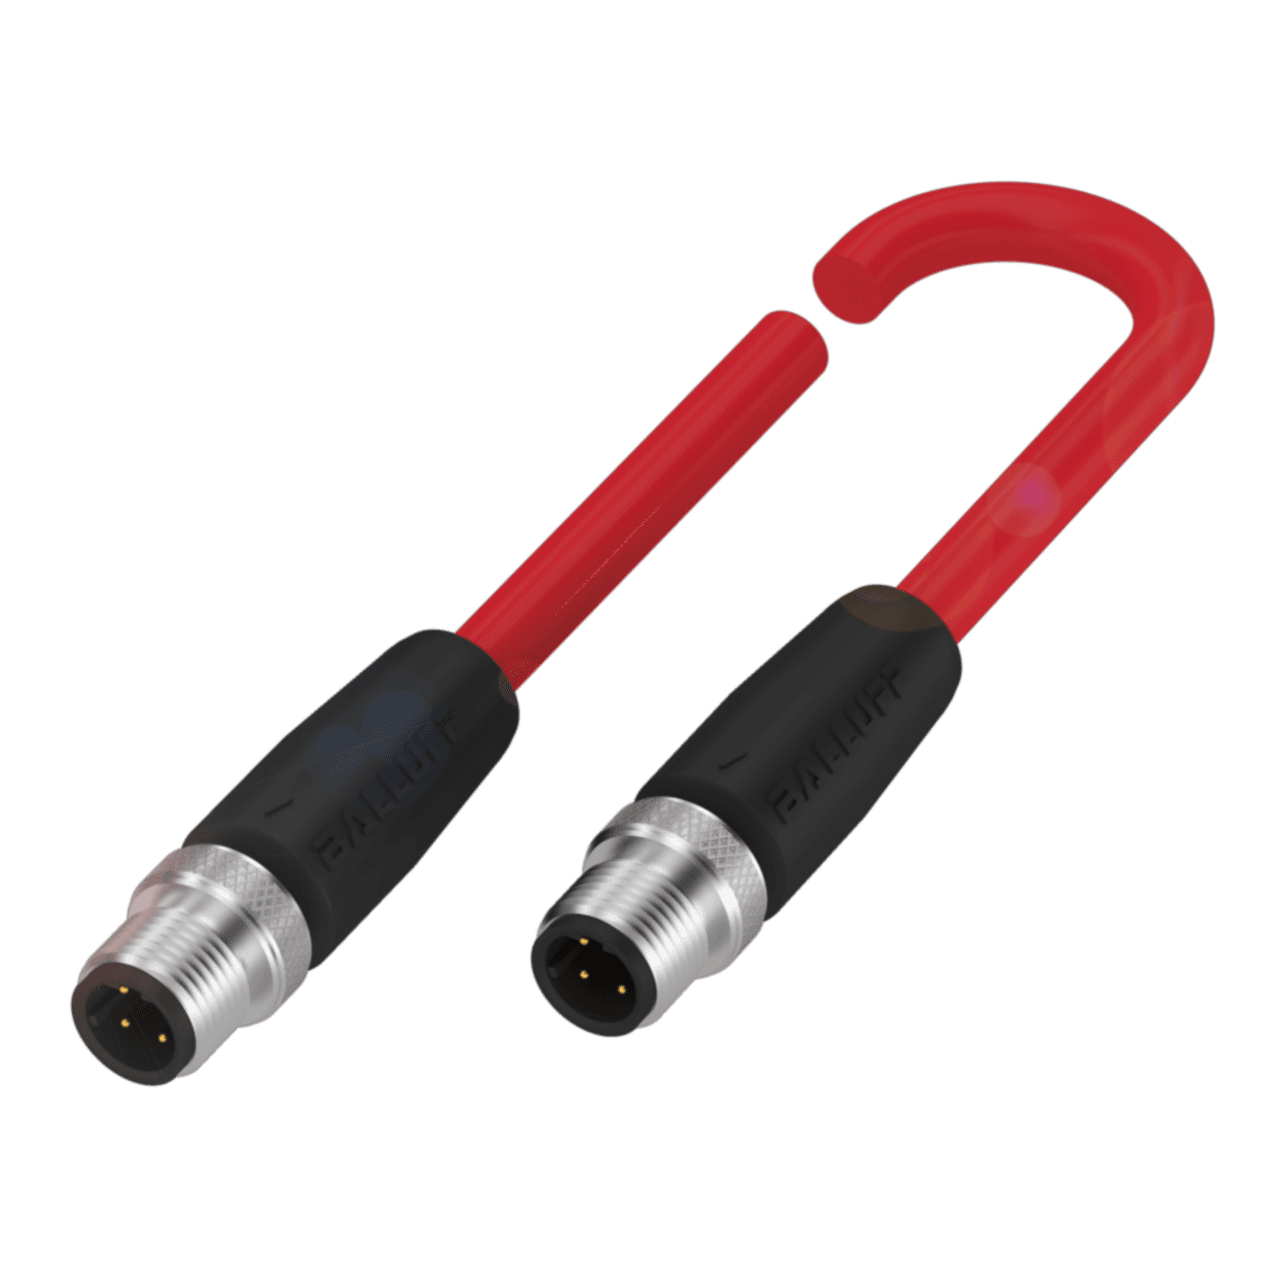 Balluff BCC0JKW Connection 1: M12x1-Male, straight, 4-pin, D-coded, Cable: TPE Shielded red, 3 m, Drag chain compatible, Connection 2: M12x1-Male, straight, 4-pin, D-coded, Number of conductors: 4, Cable temperature, flexible routing: -40...80 °C, Operating voltage Ub: 2